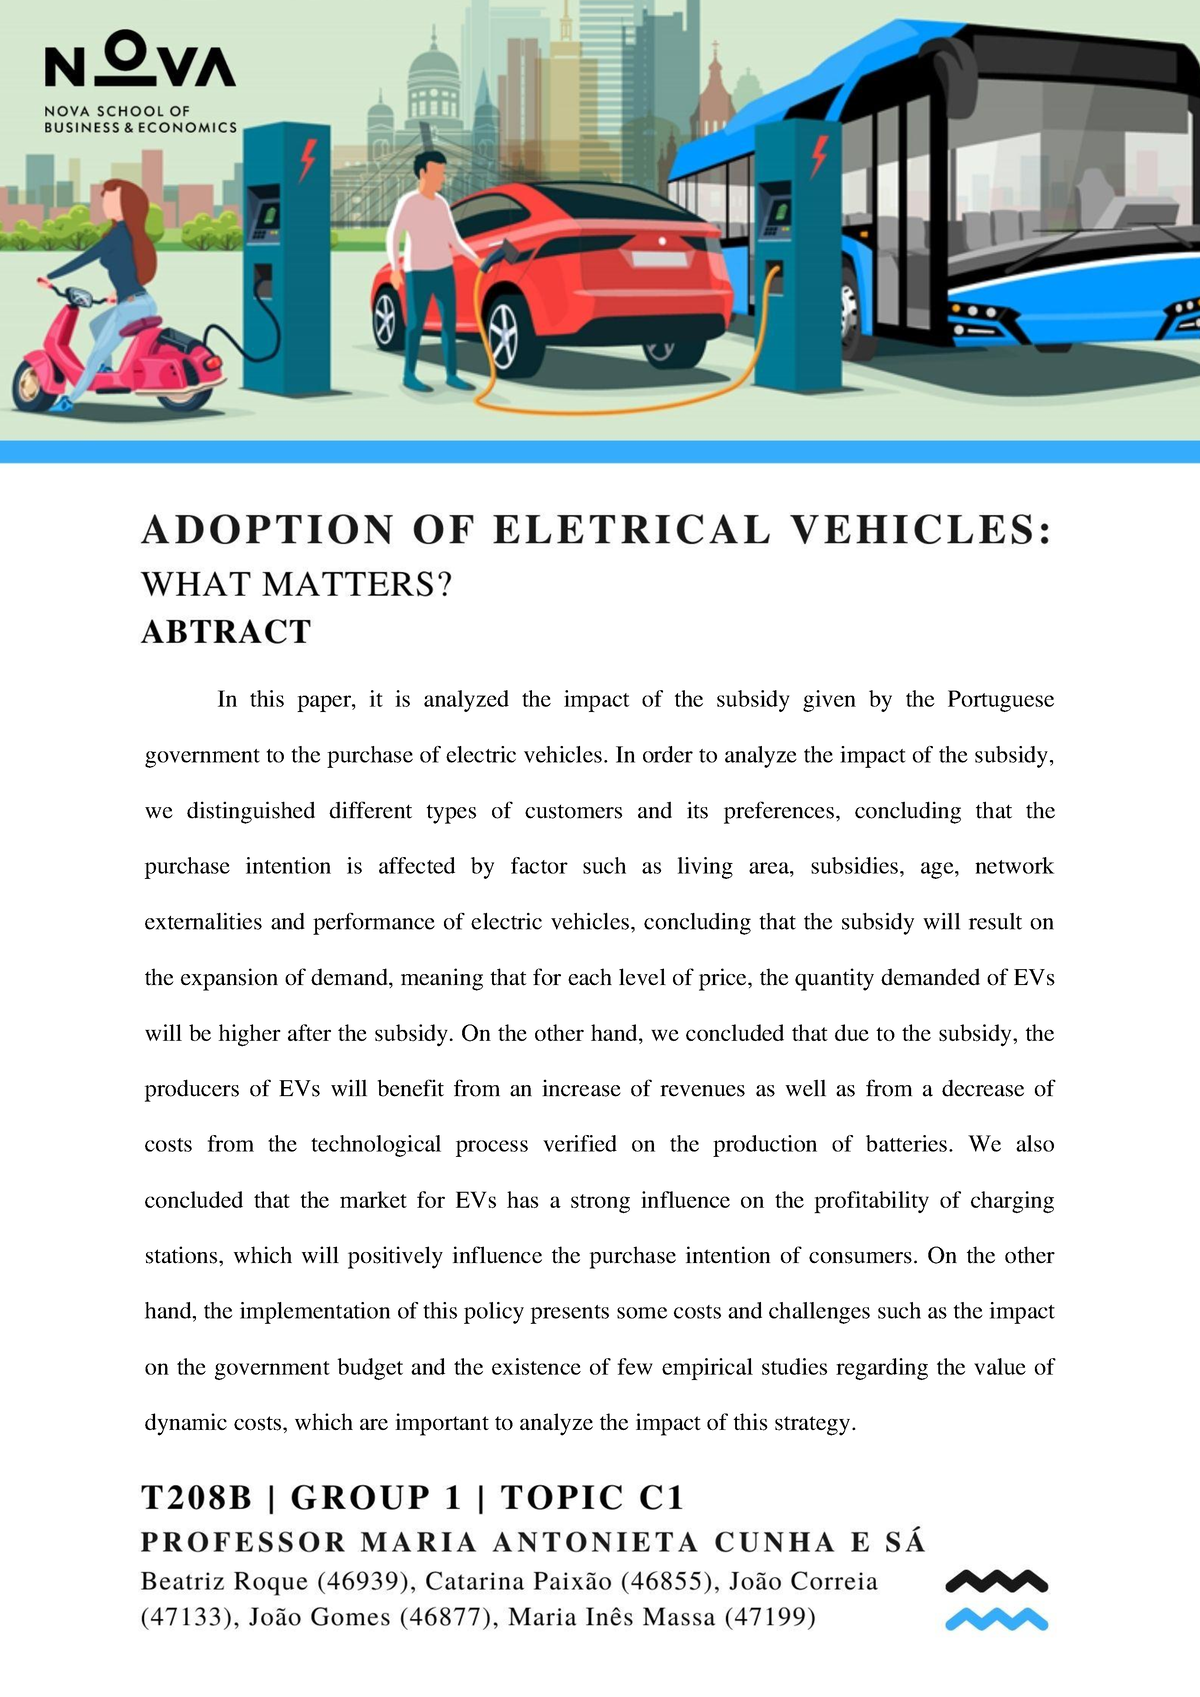 Adoption of Eletrical Vehicles (Portuguese Government Policies) In